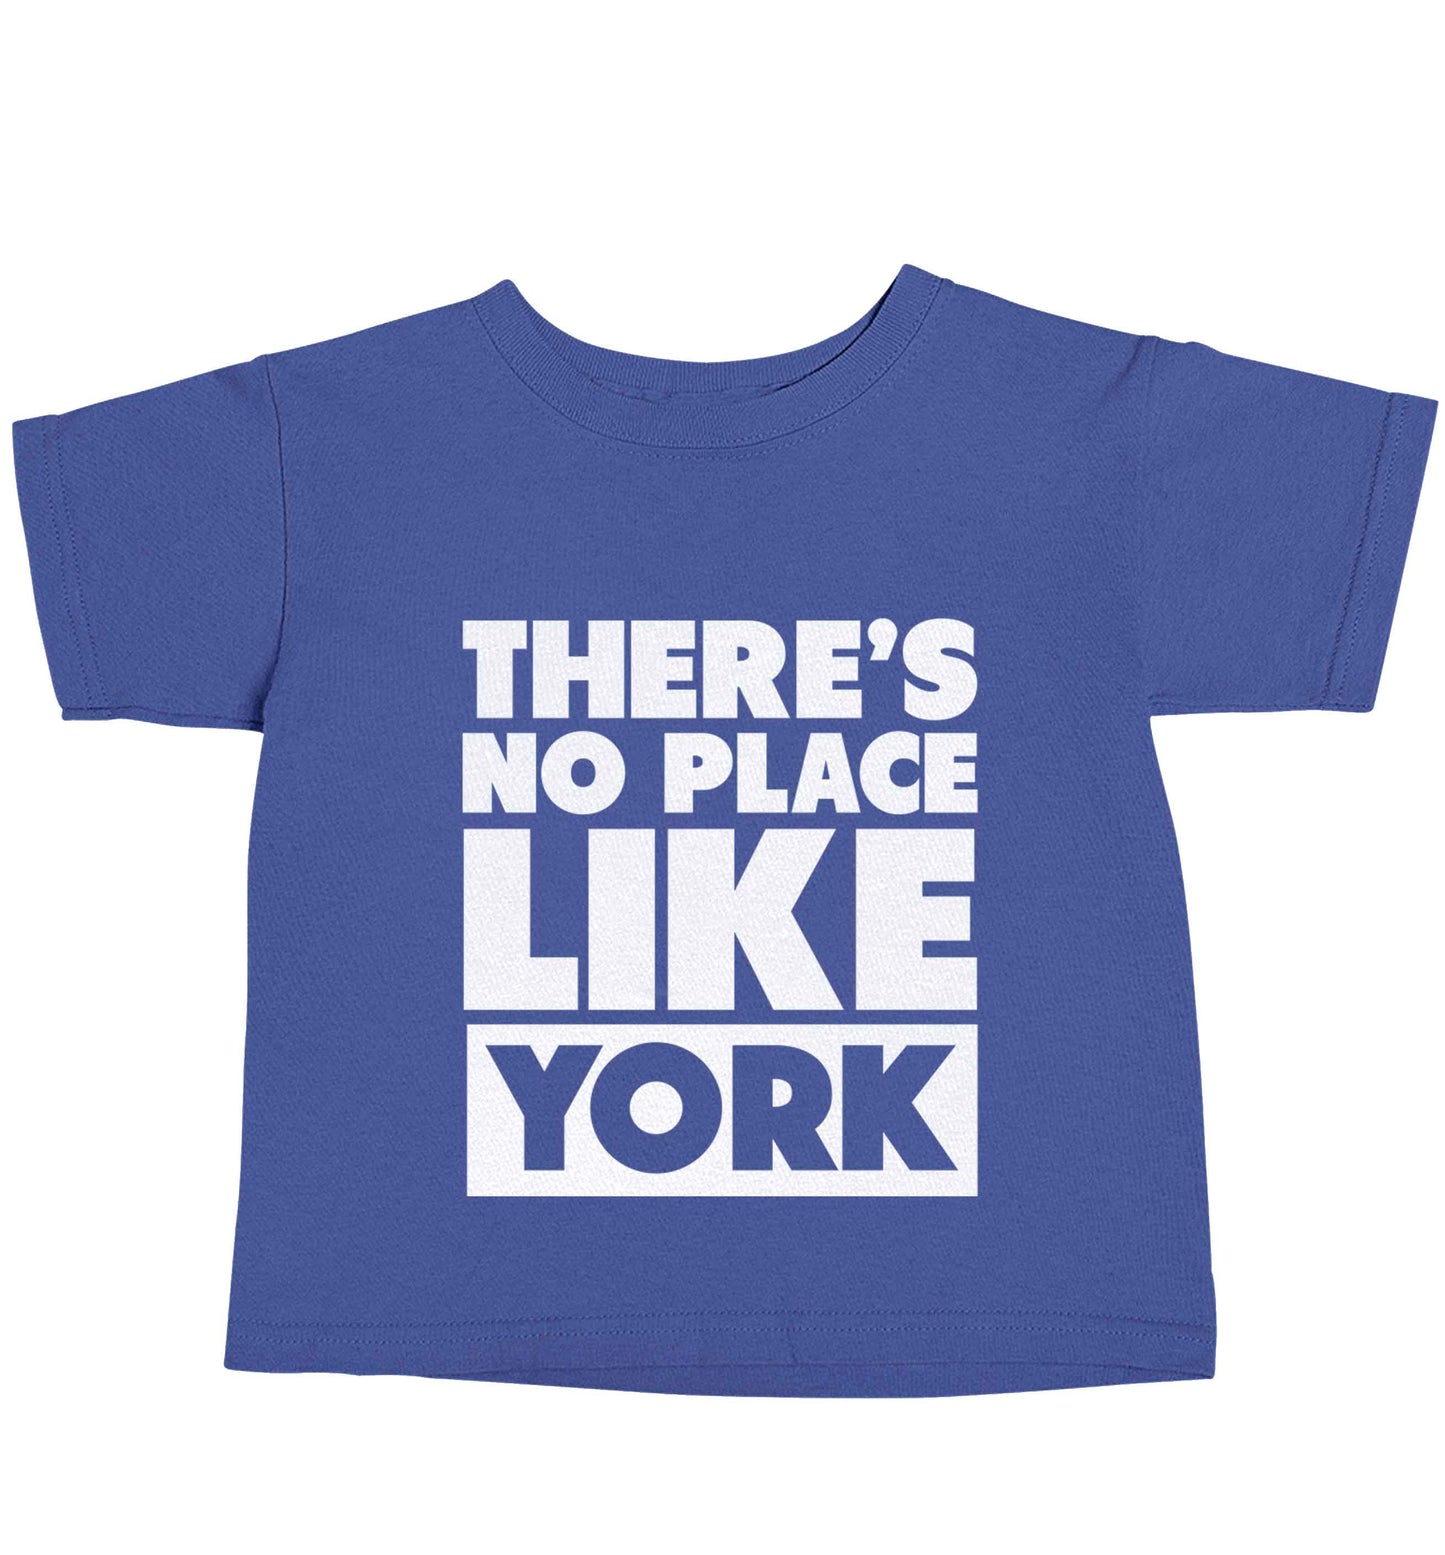 There's no place like york blue baby toddler Tshirt 2 Years